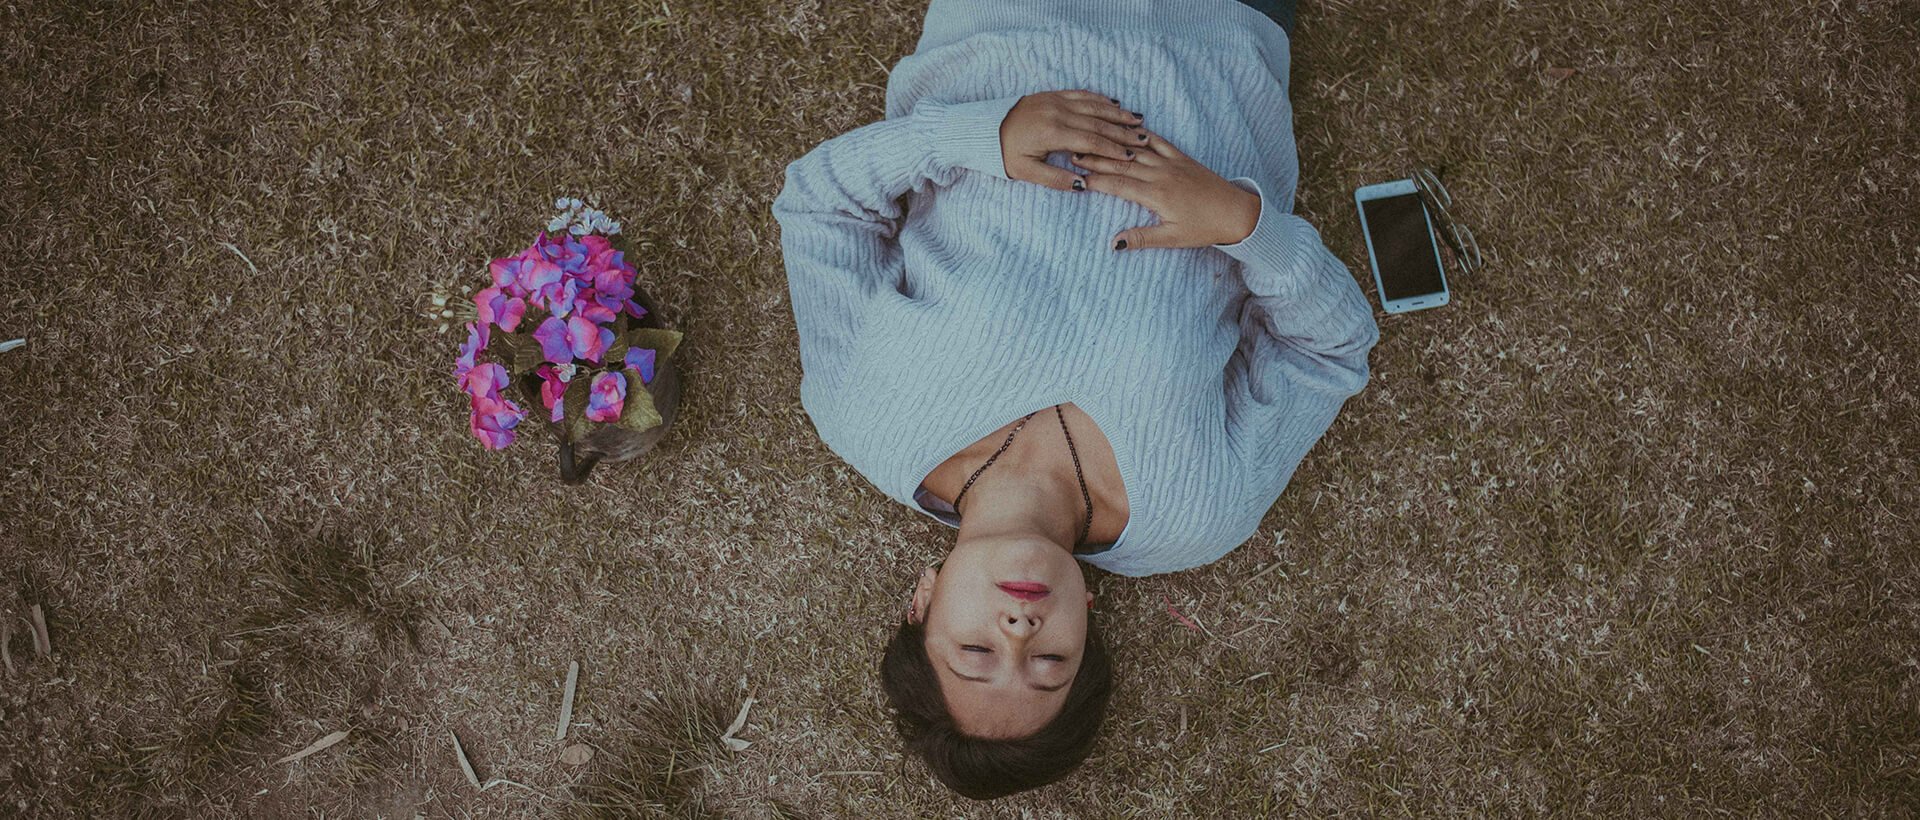 a man laying on the ground next to flowers and a cell phone.